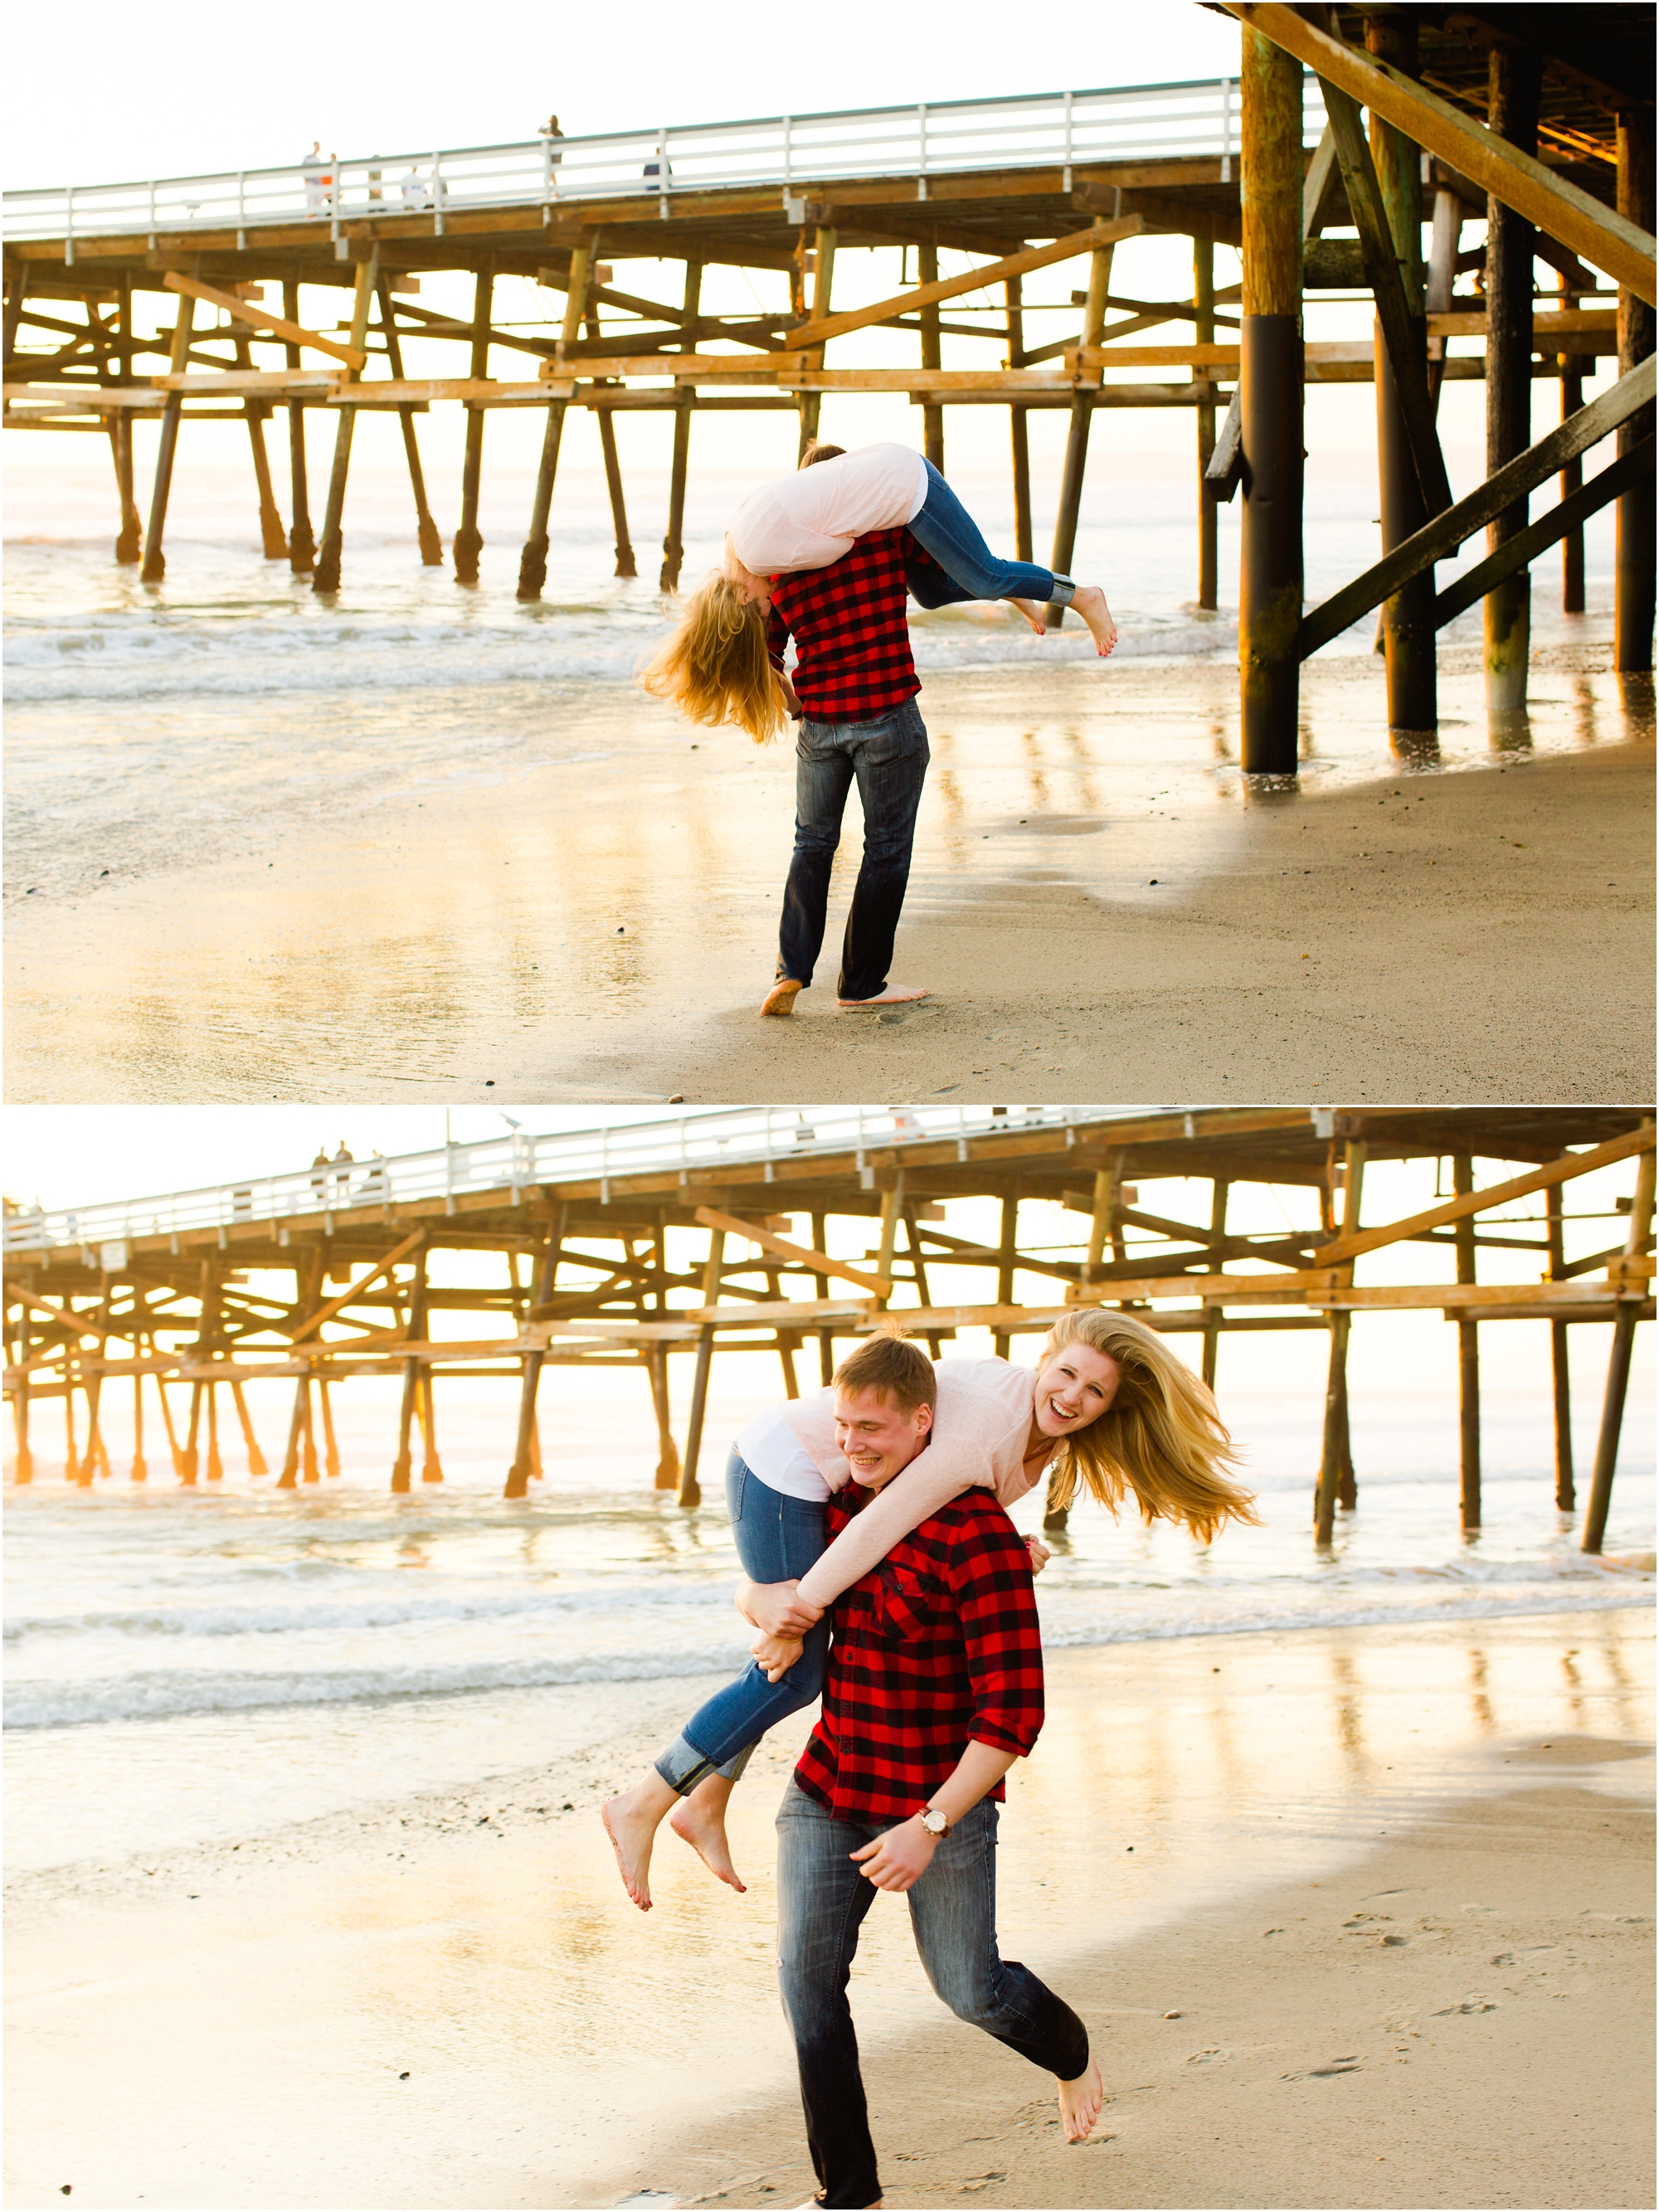 Beach Engagement Session - https://brittneyhannonphotography.com